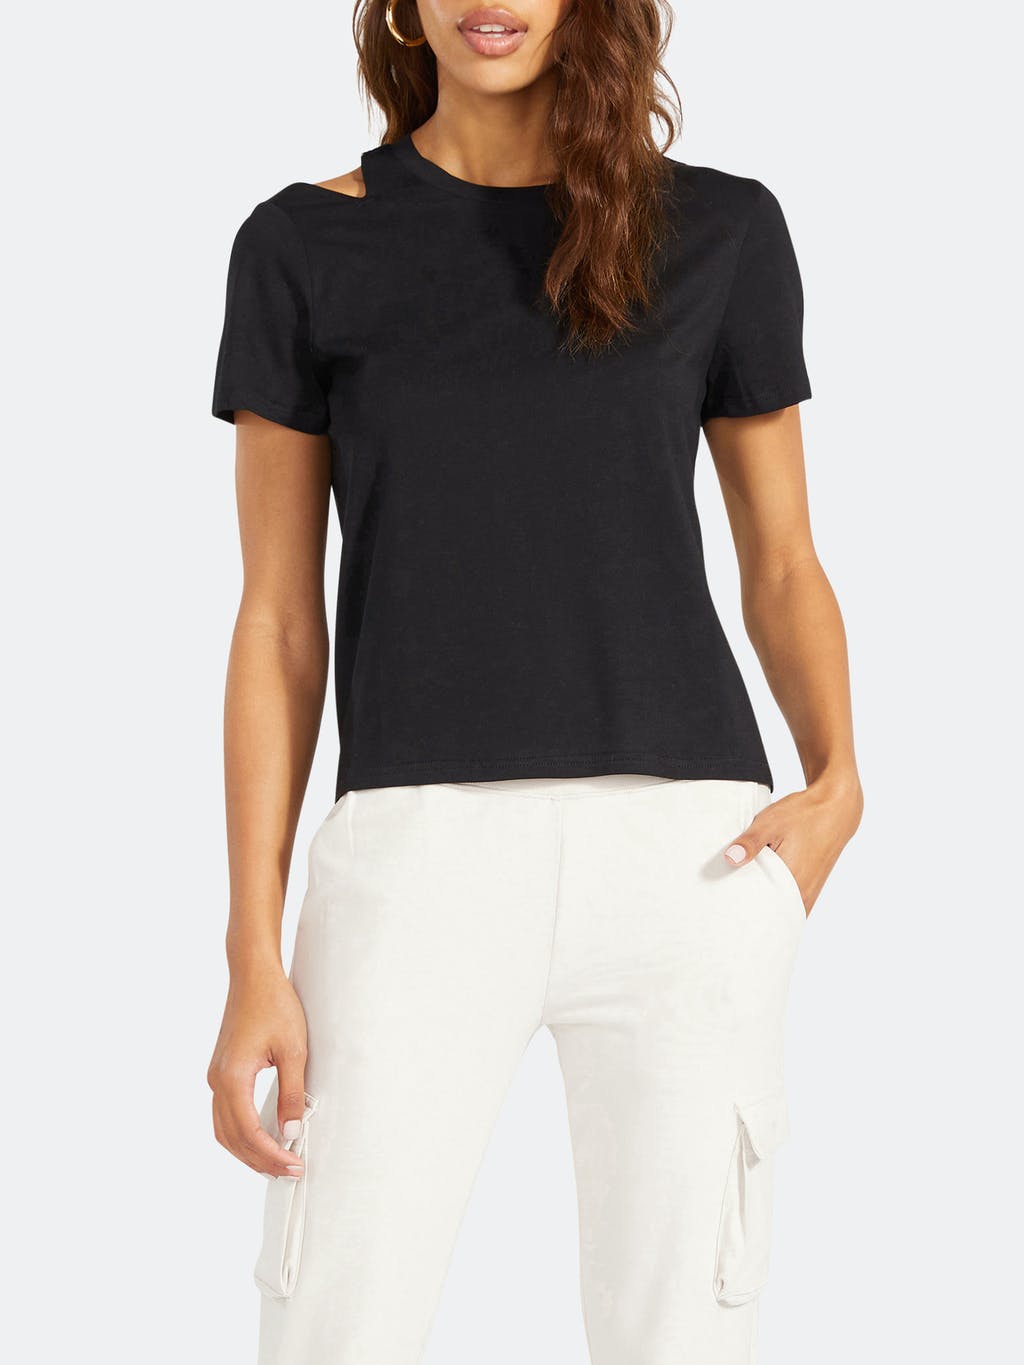 Cut to the Chase Crewneck Soft Modal Jersey Top